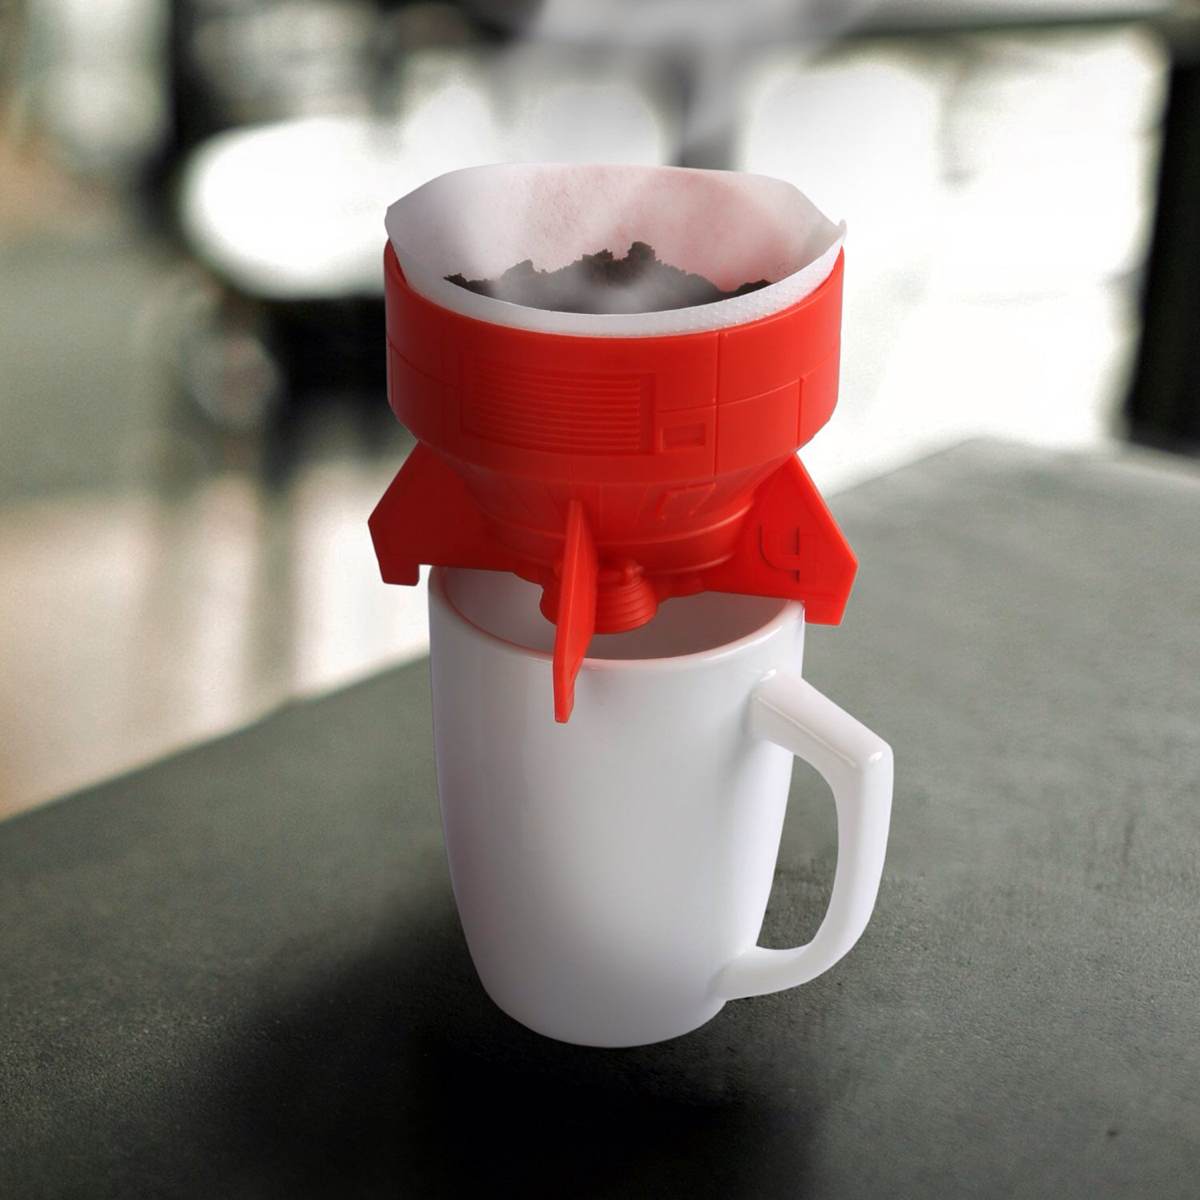 GAMAGO's "Rocket Fuel" pour-over coffee brewer. ($8)